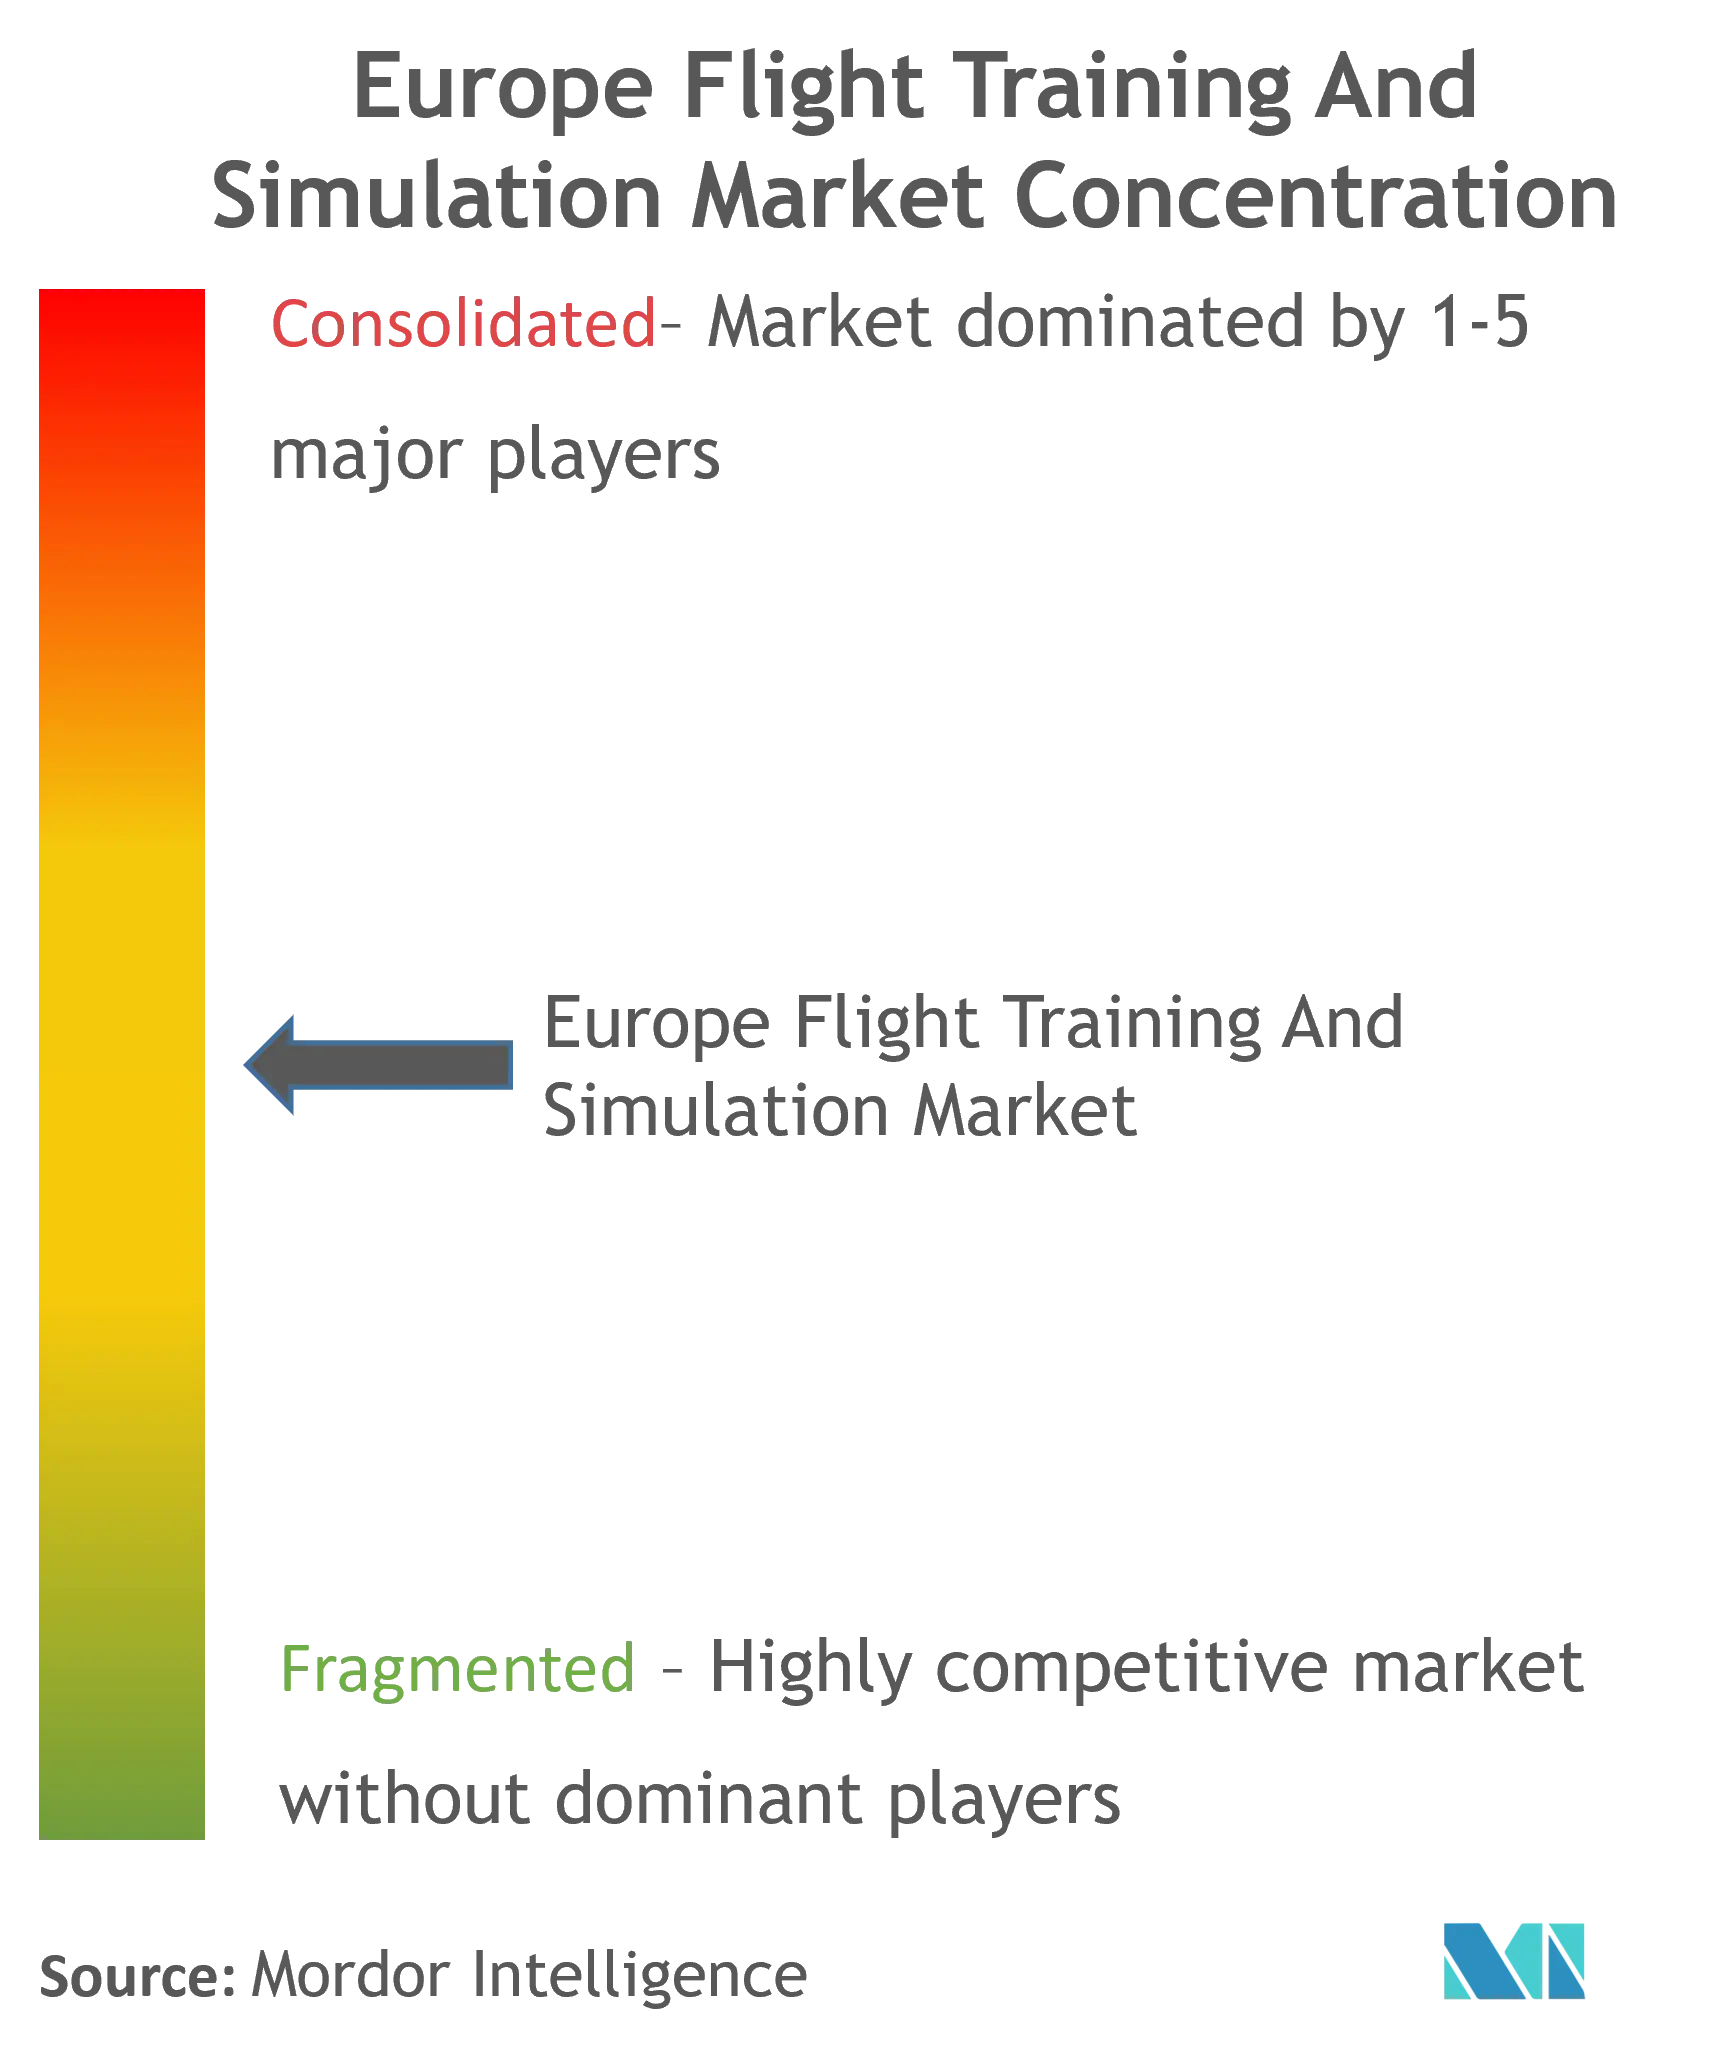 Europe Flight Training And Simulation Market Concentration